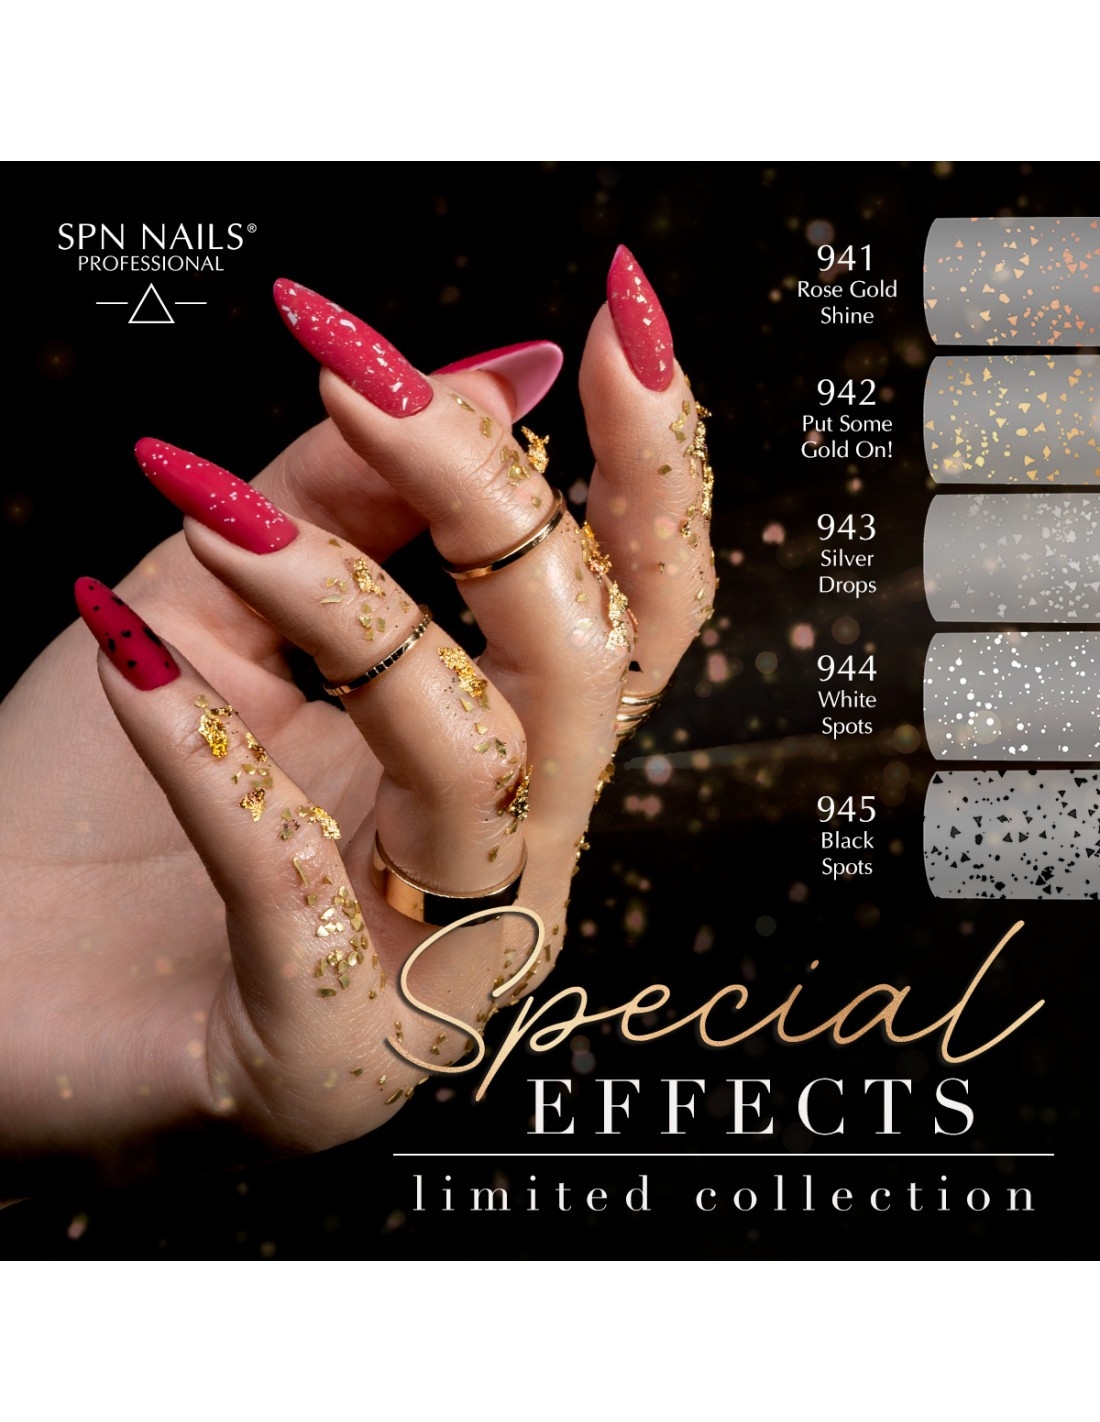 UK Nail Products Supplier